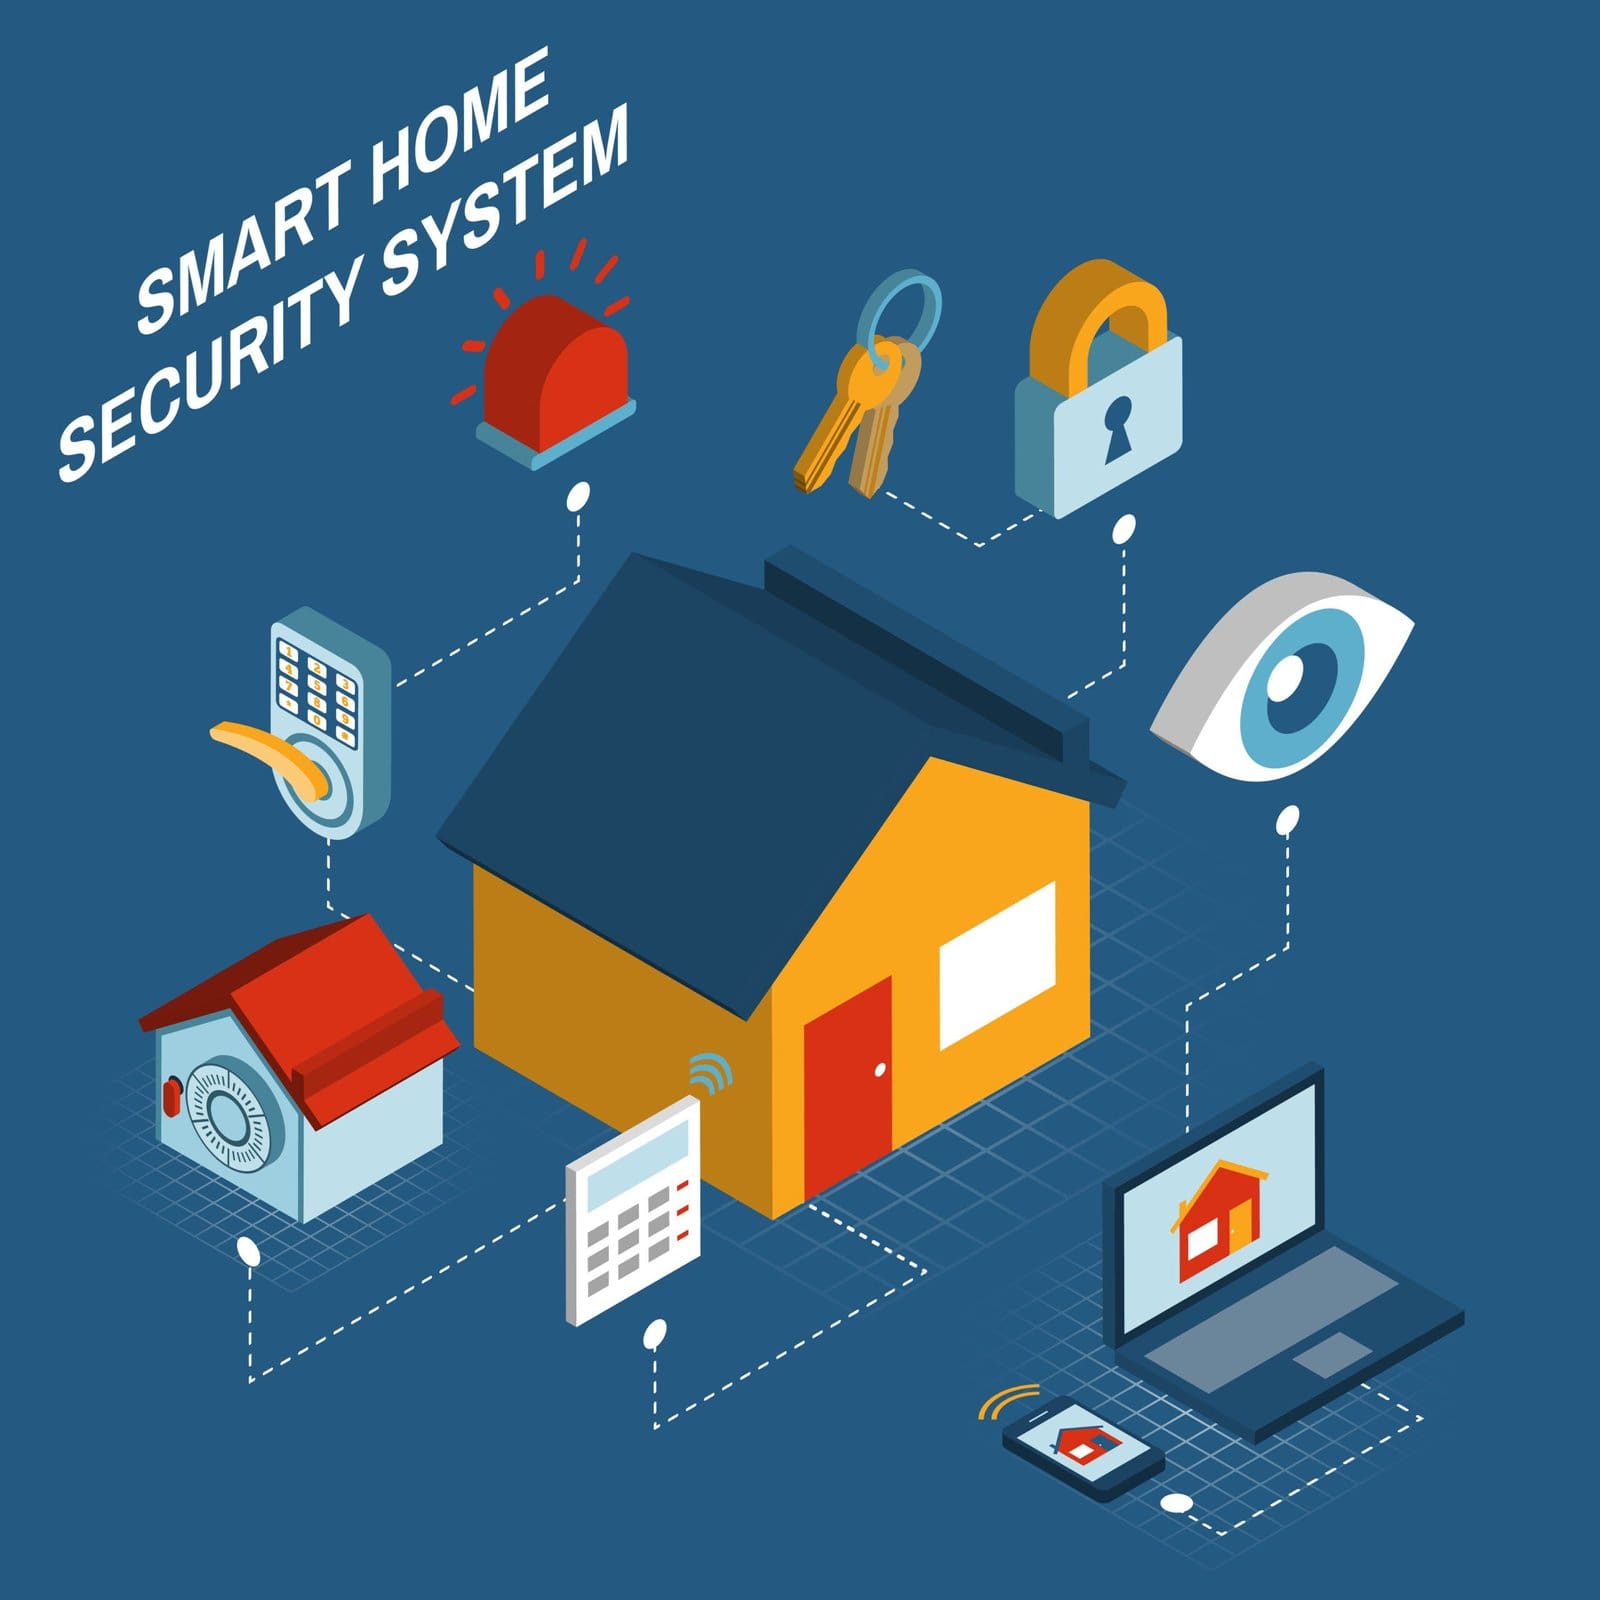 How Do Smart Security Systems Work?